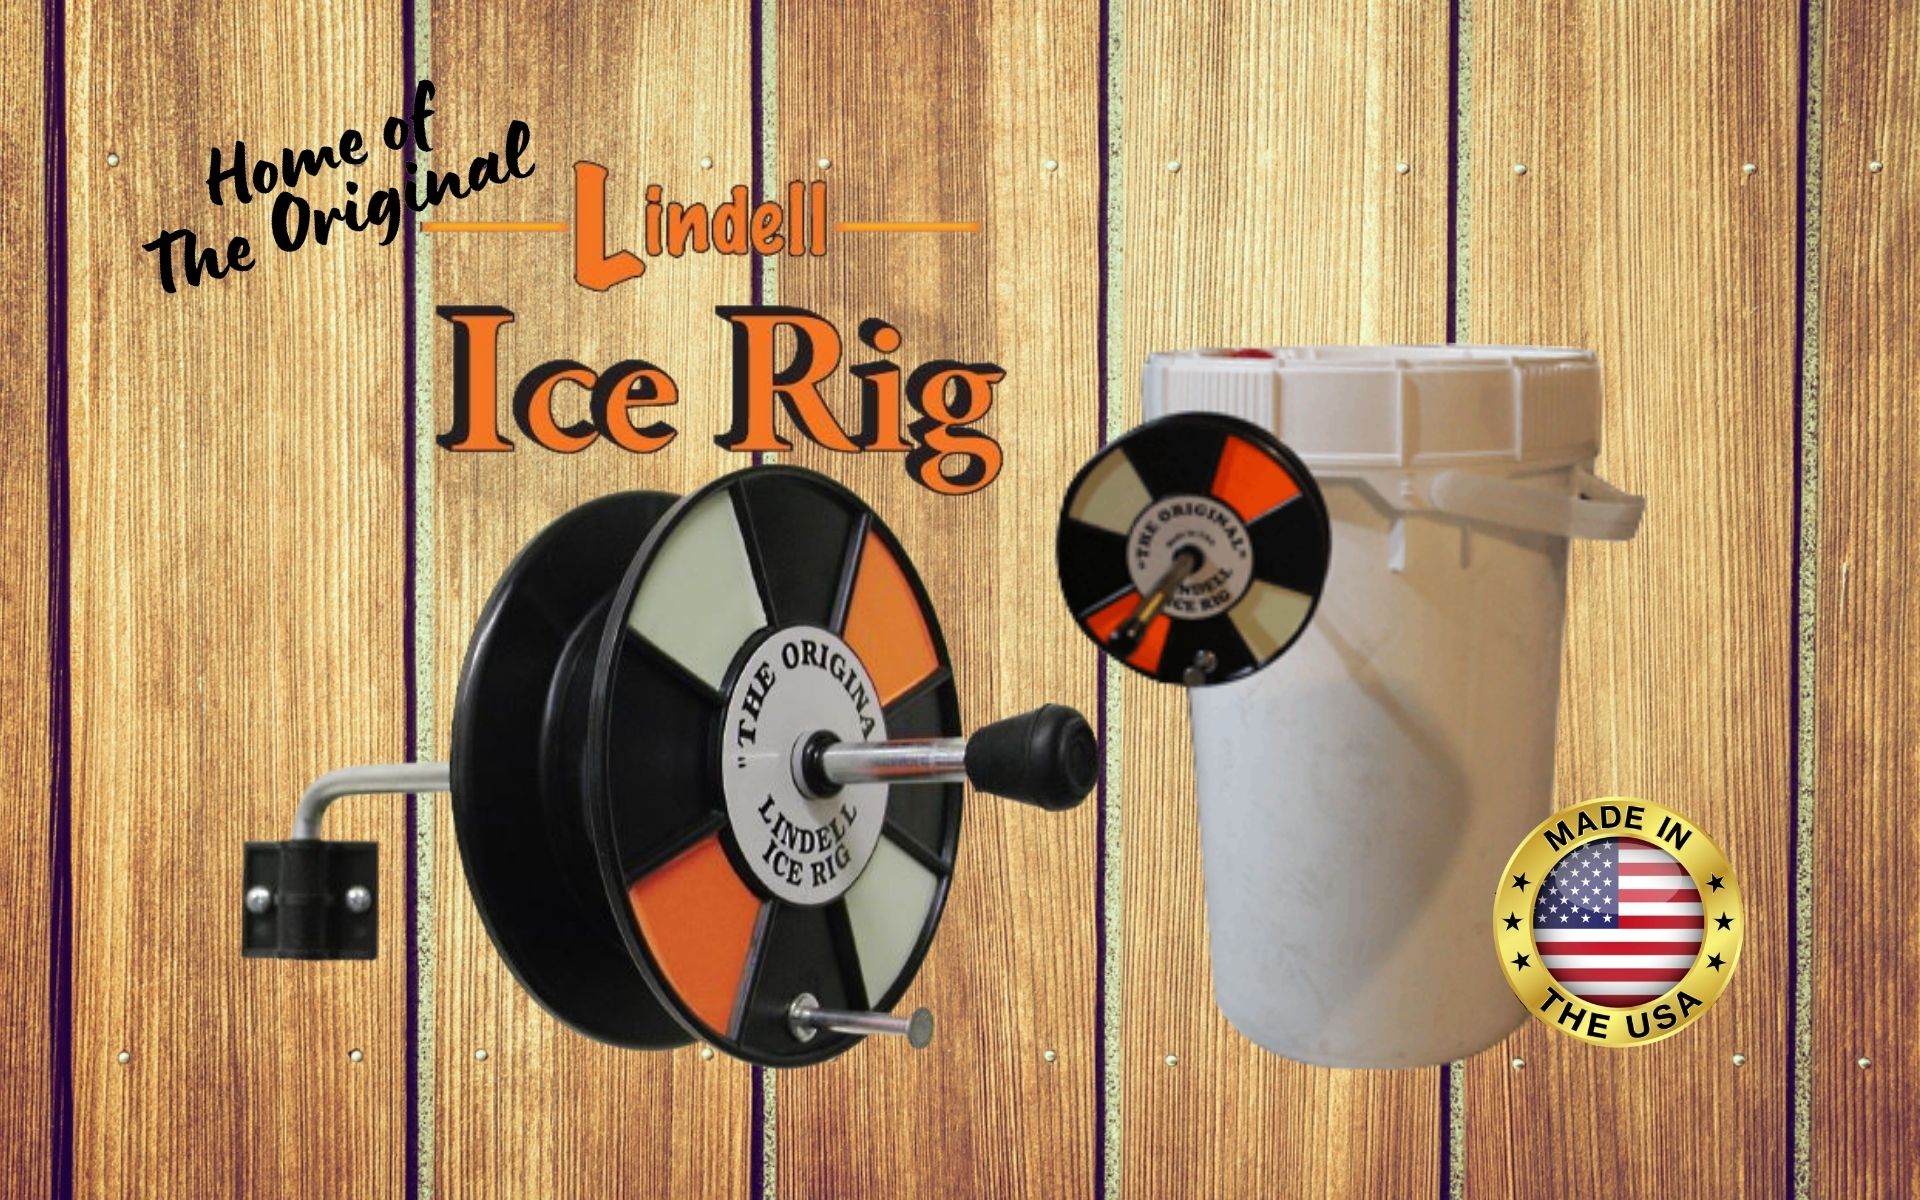 Buy Auto Jigger and 3 Lindell Ice Rigs, Get the 4th Ice Rig Free - Lindell  Ice Rigs